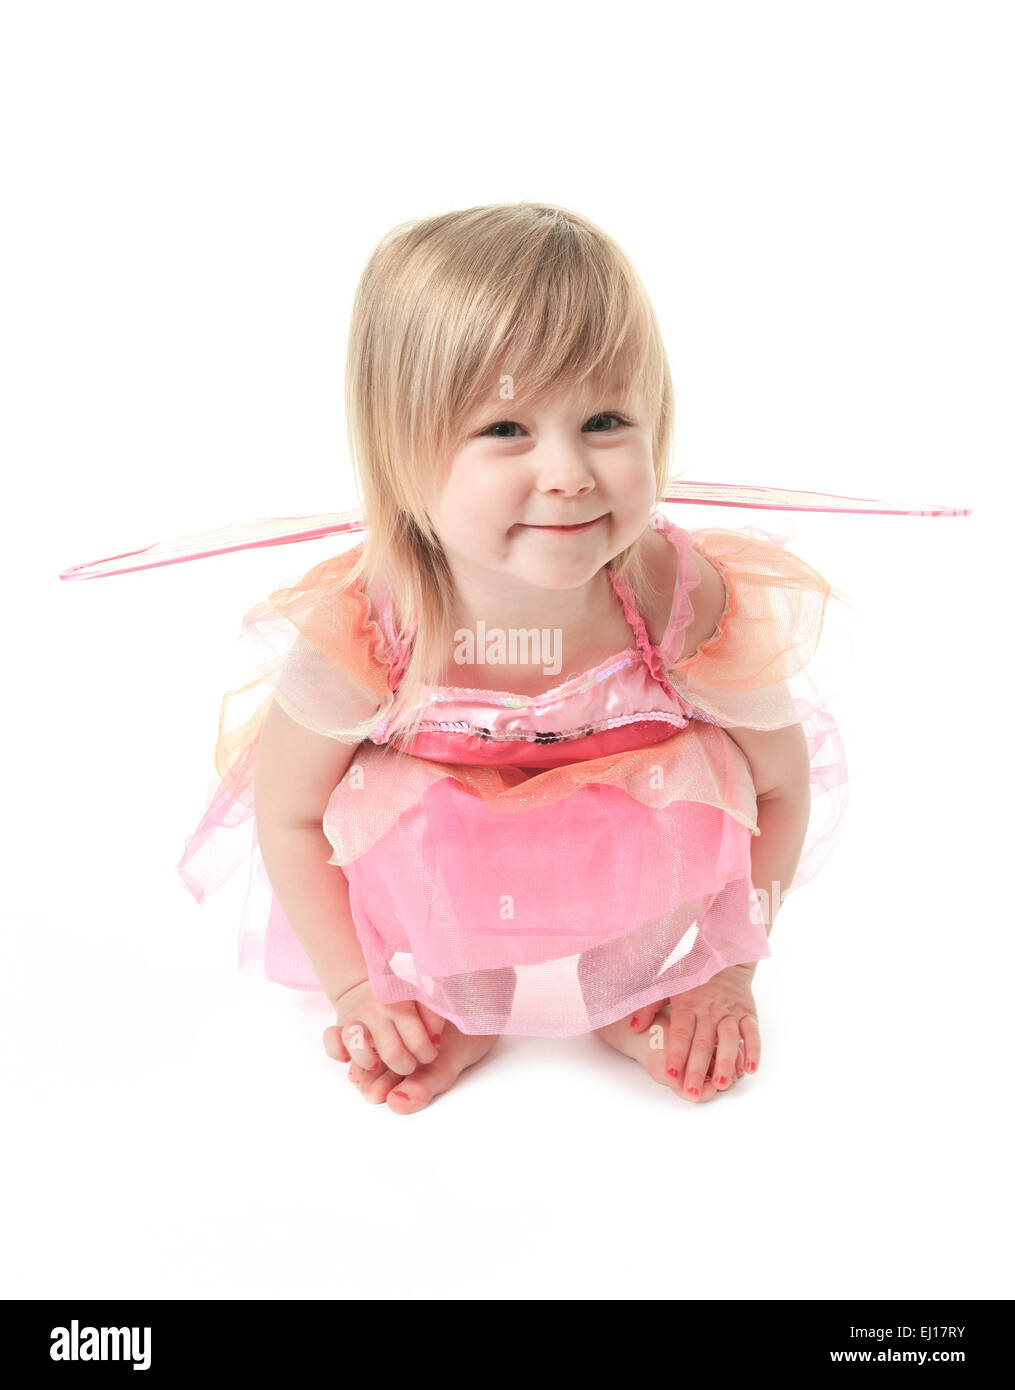 Butterfly face child Cut Out Stock Images & Pictures - Alamy